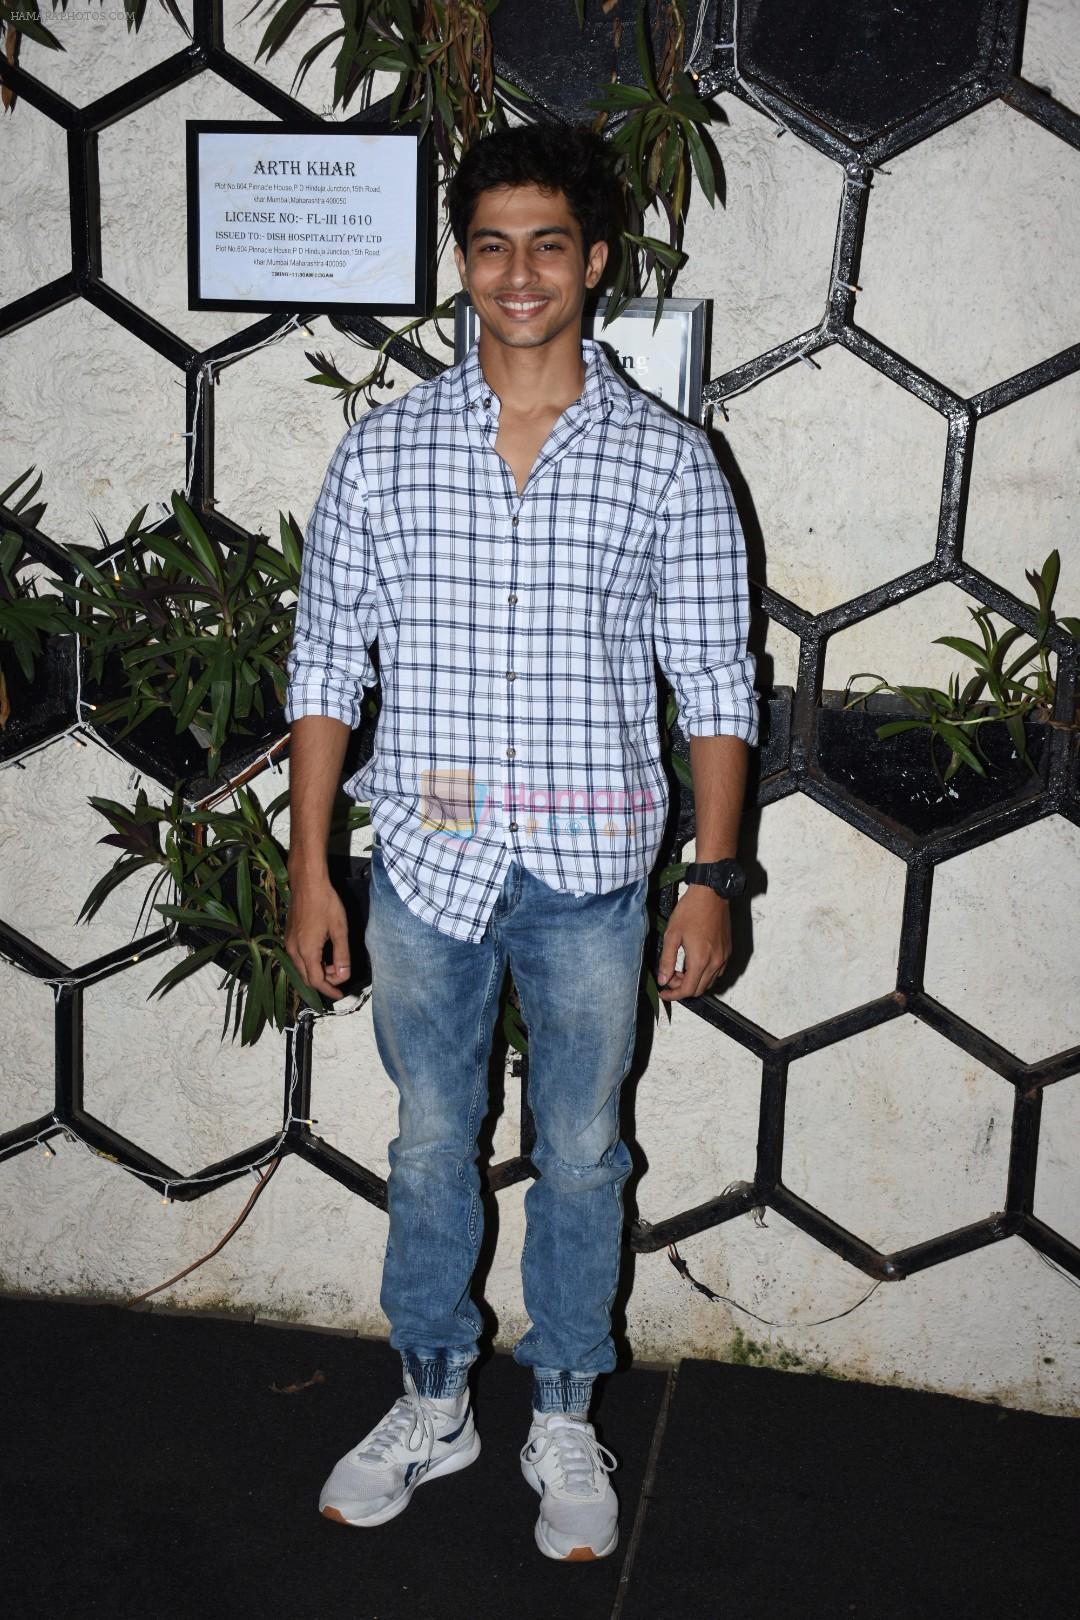 at the Wrapup party of film Yeh Ballet at Arth in khar on 13th June 2019